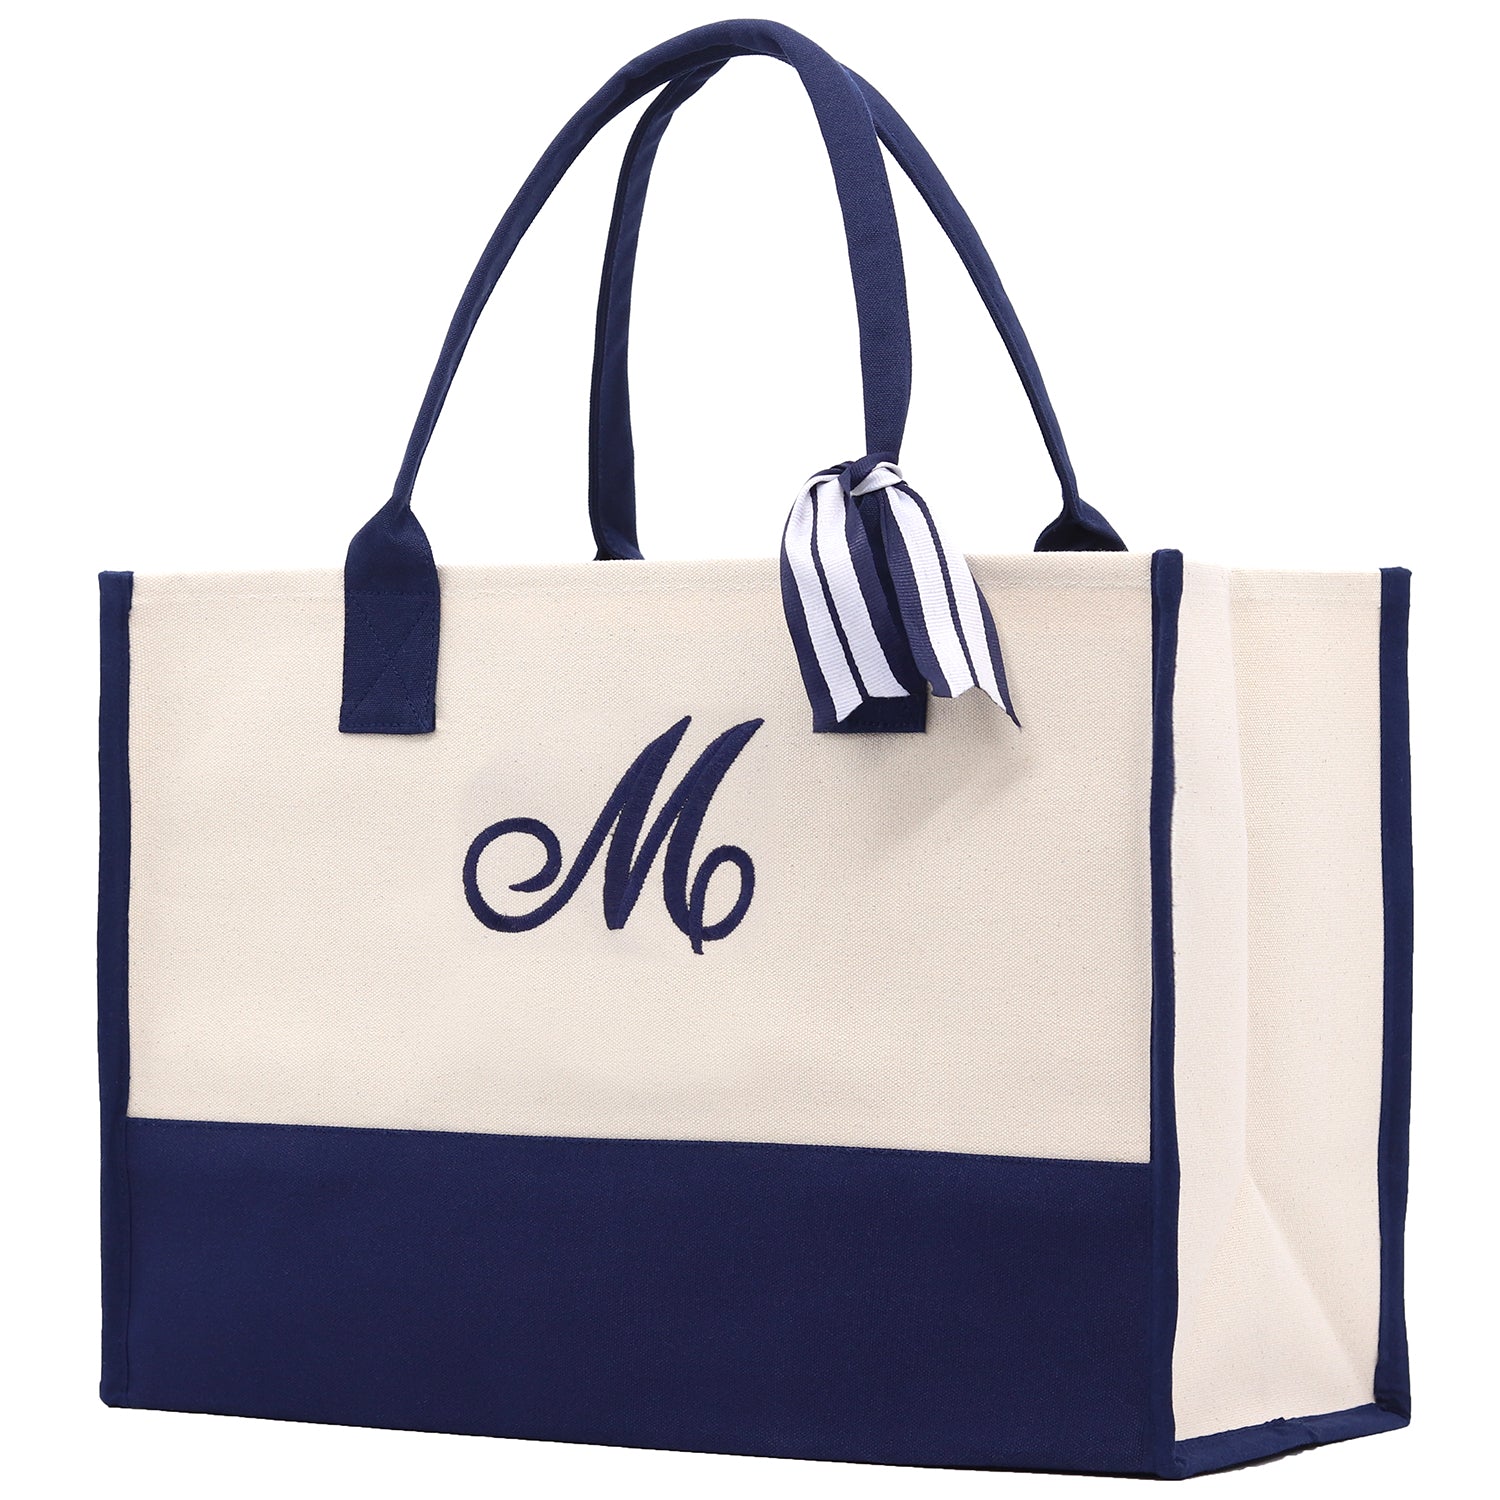 Monogram Tote Bag with 100% Cotton Canvas and a Chic Personalized Monogram Navy Blue Vanessa Rosella Script M 